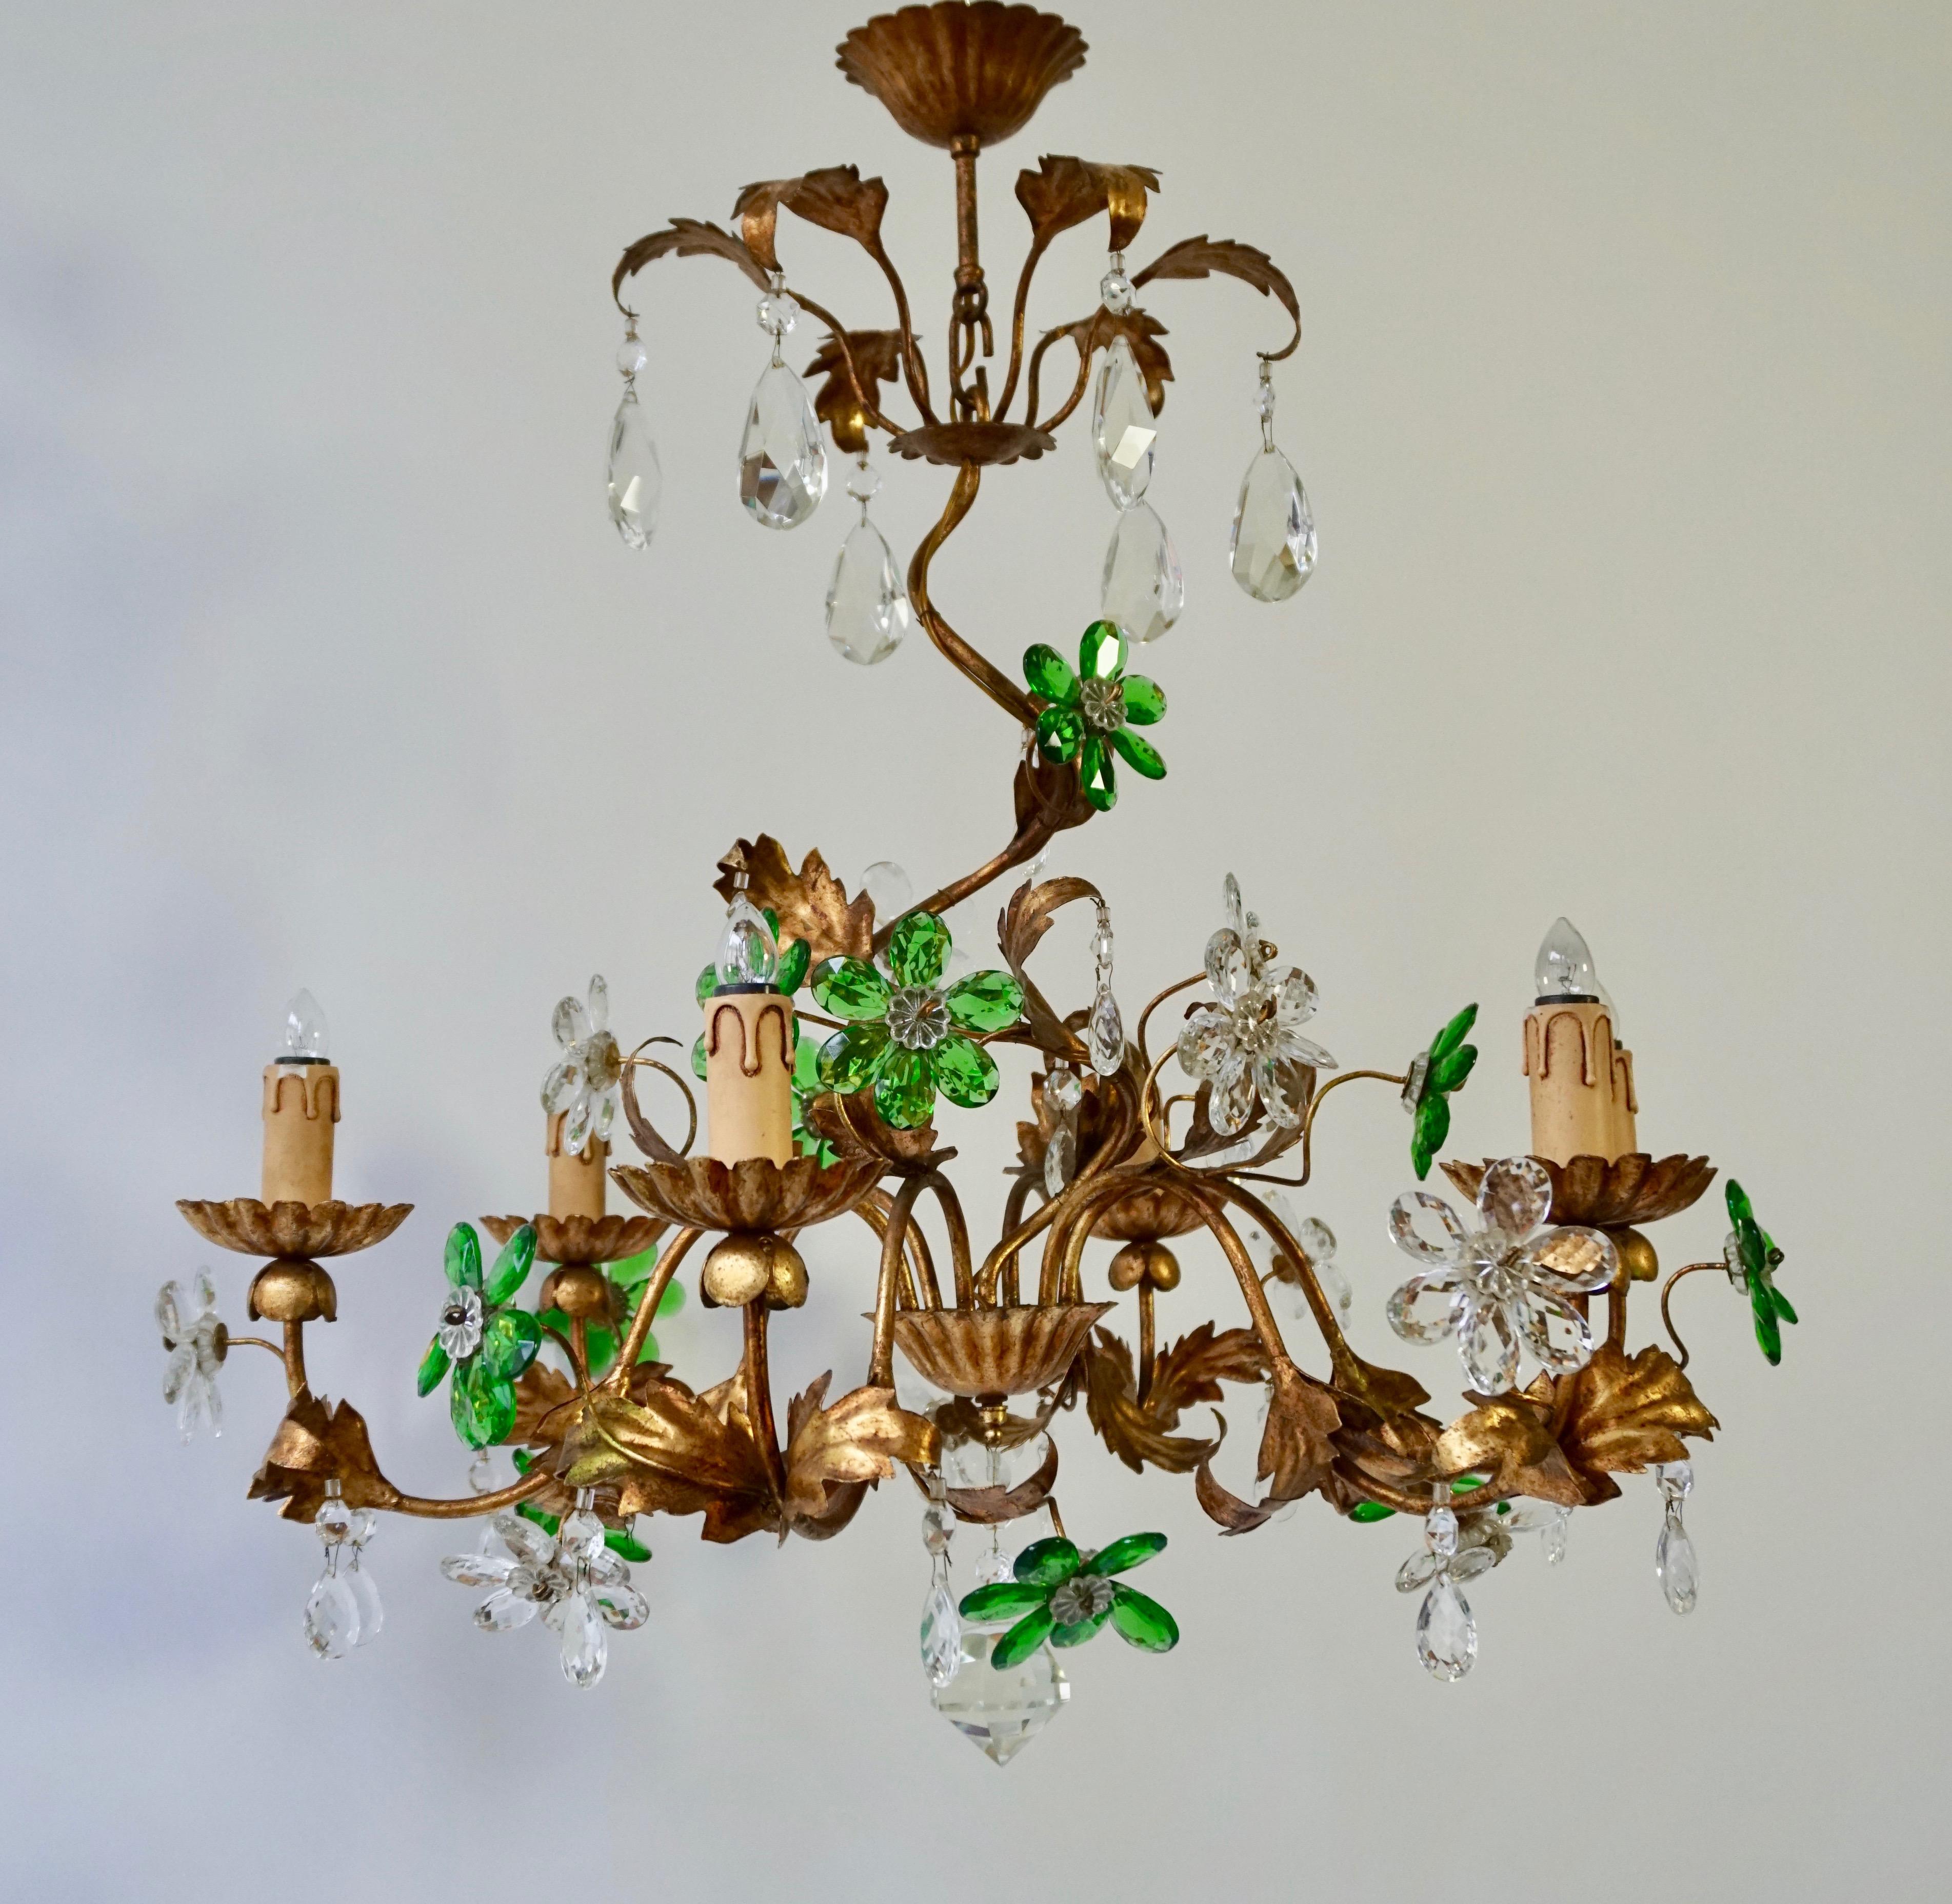 Floral Italian gilt iron chandelier, with glass flowers. The central stem, supports six E14 bulbs.
The arms, fluidly interweave, with gilt leaves decorating throughout as well as green and transparent flowers.
Measures: Diameter 75 cm.
Height 80